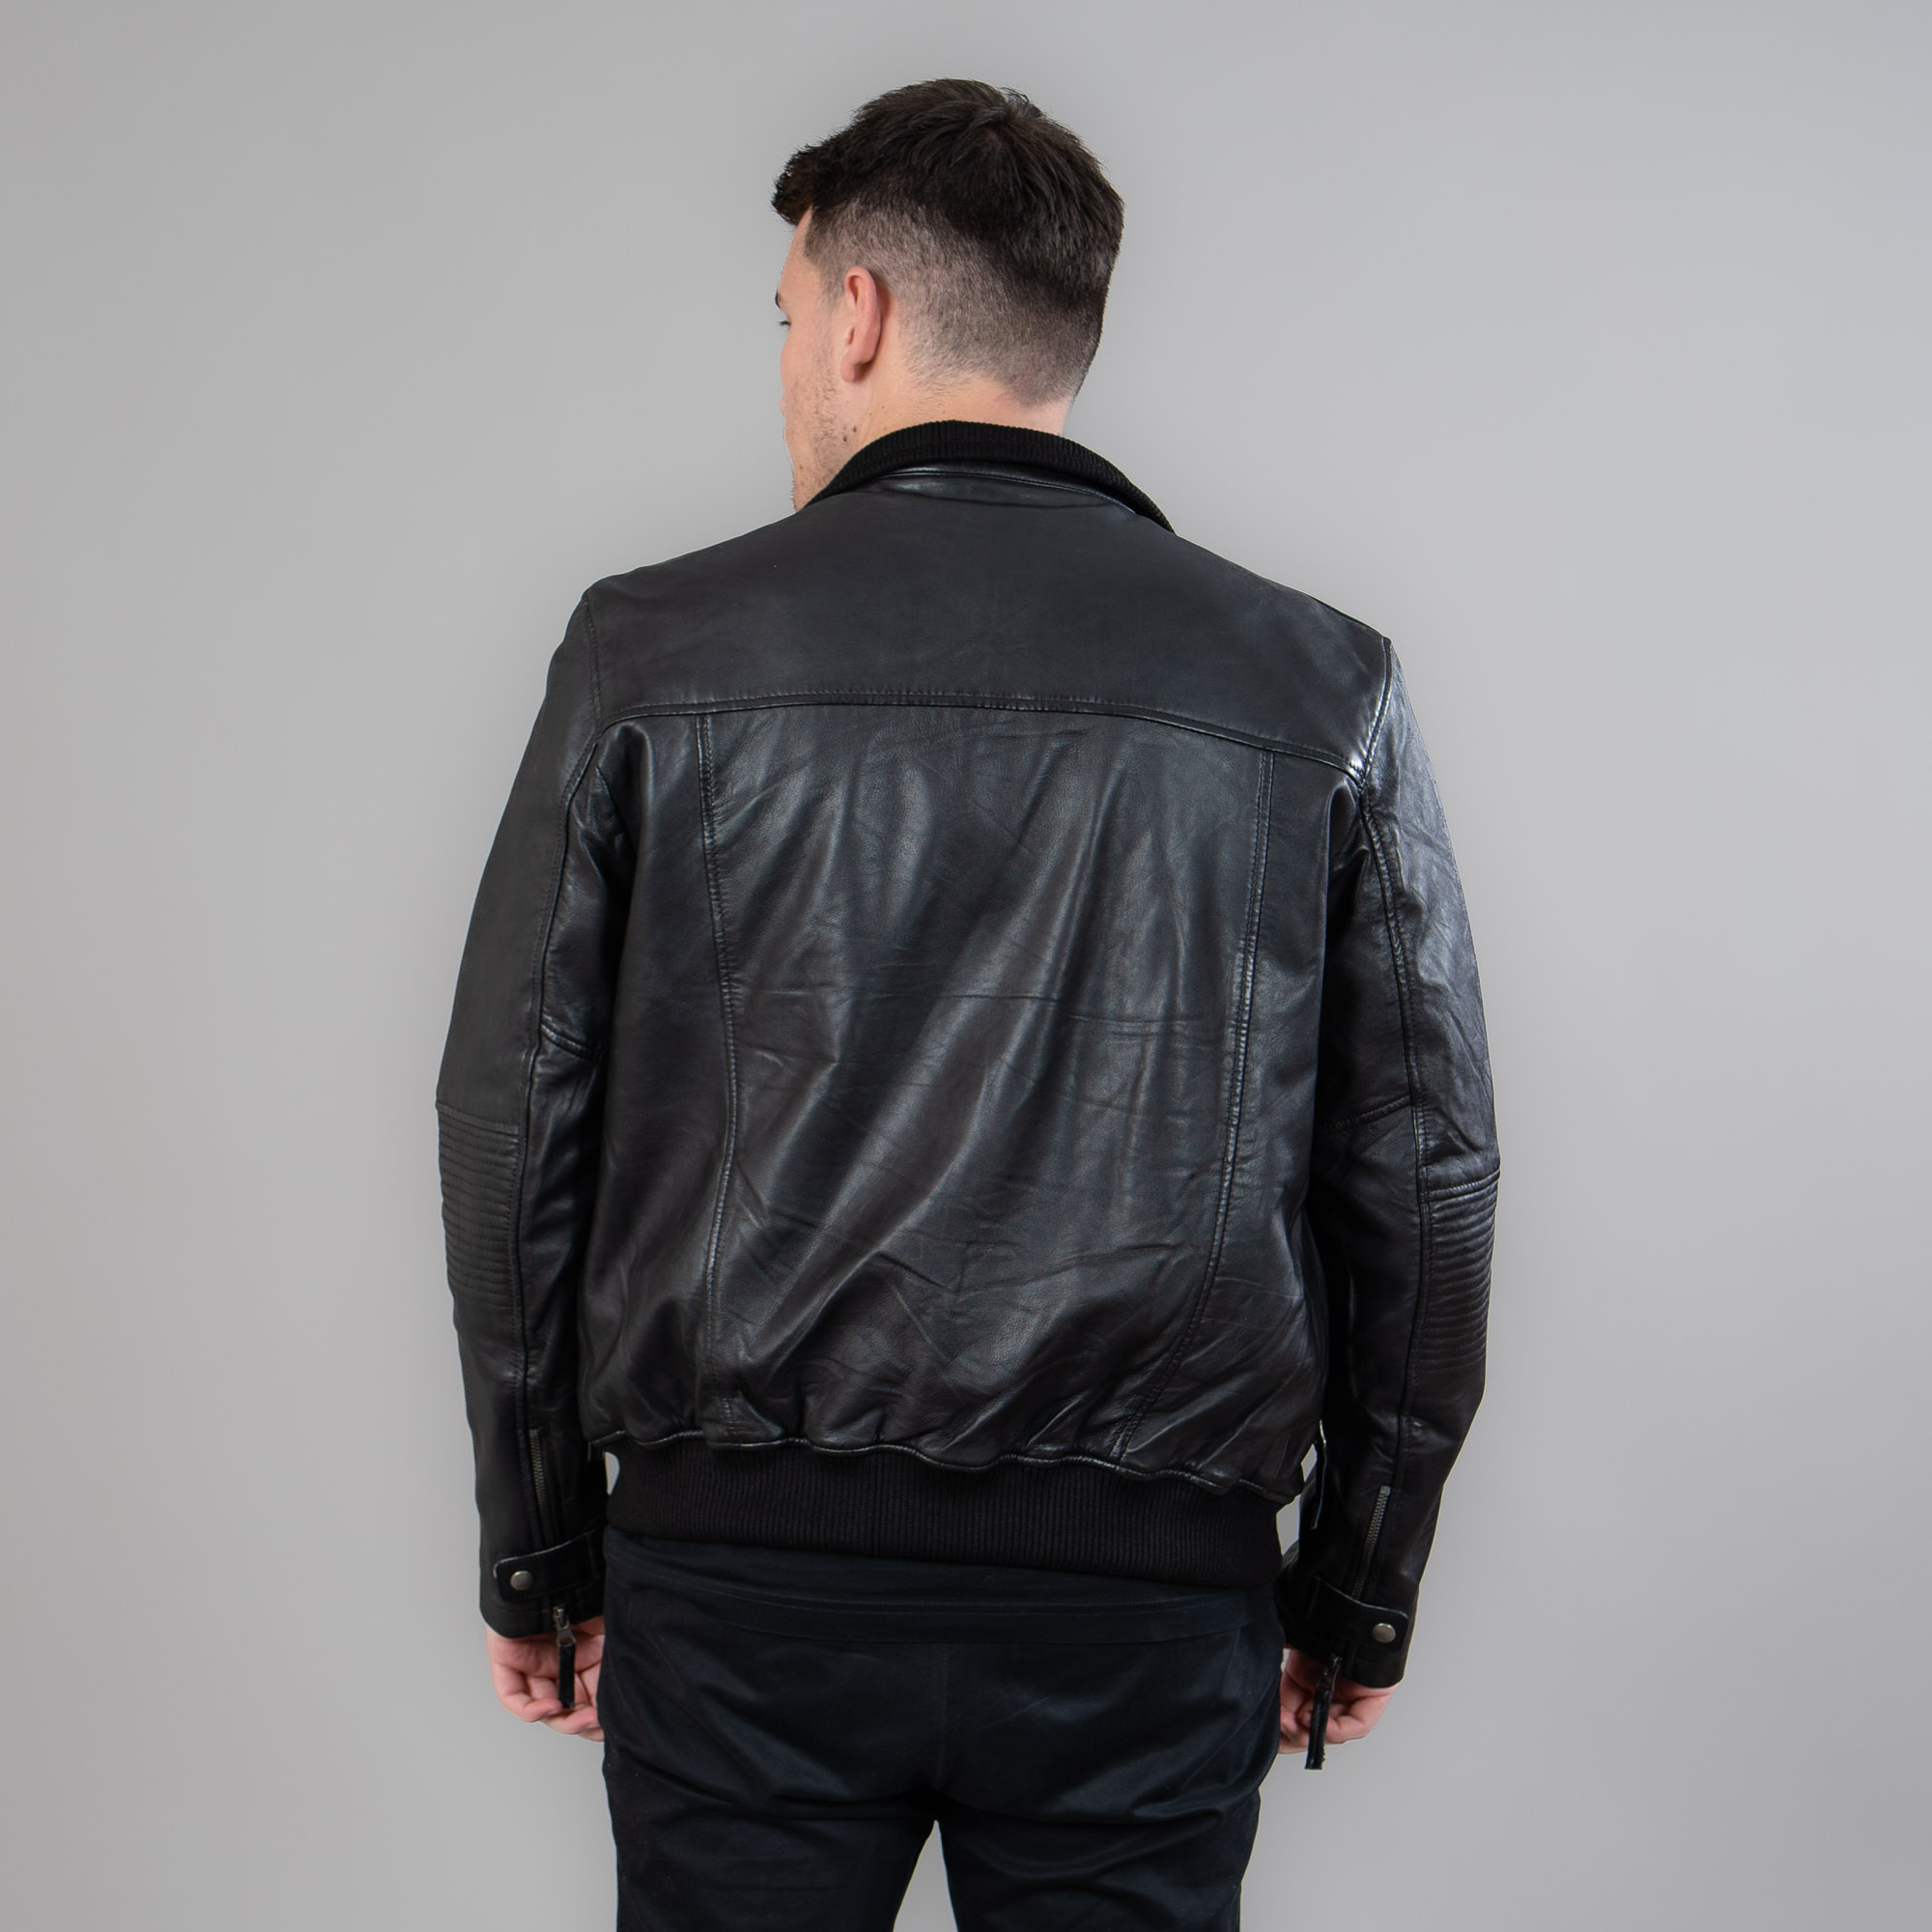 Lambskin jacket with a collar in black color